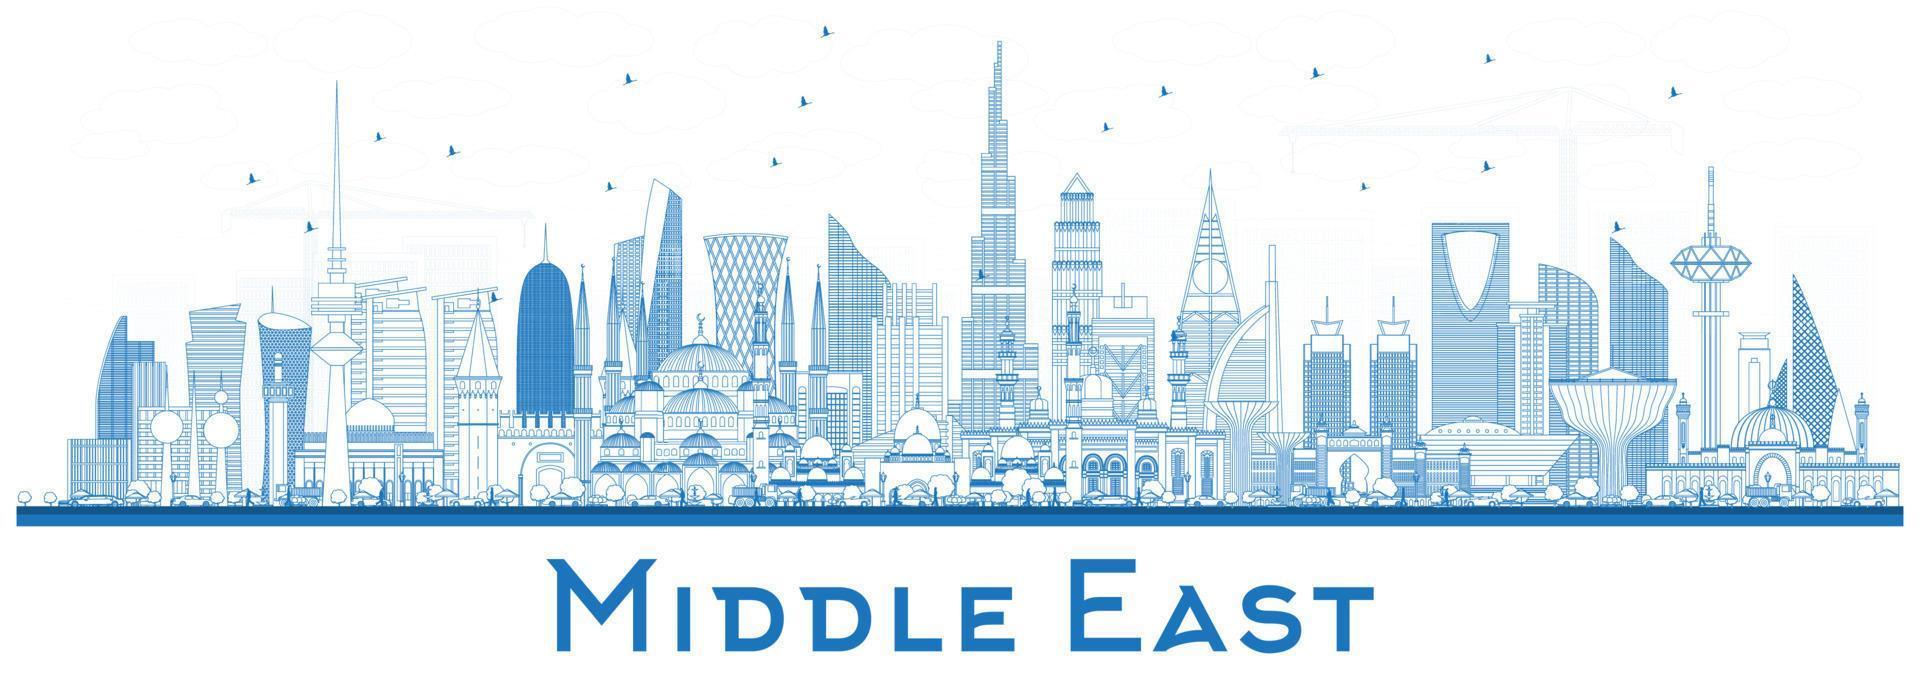 Outline Middle East City Skyline with Blue Buildings Isolated on White. vector